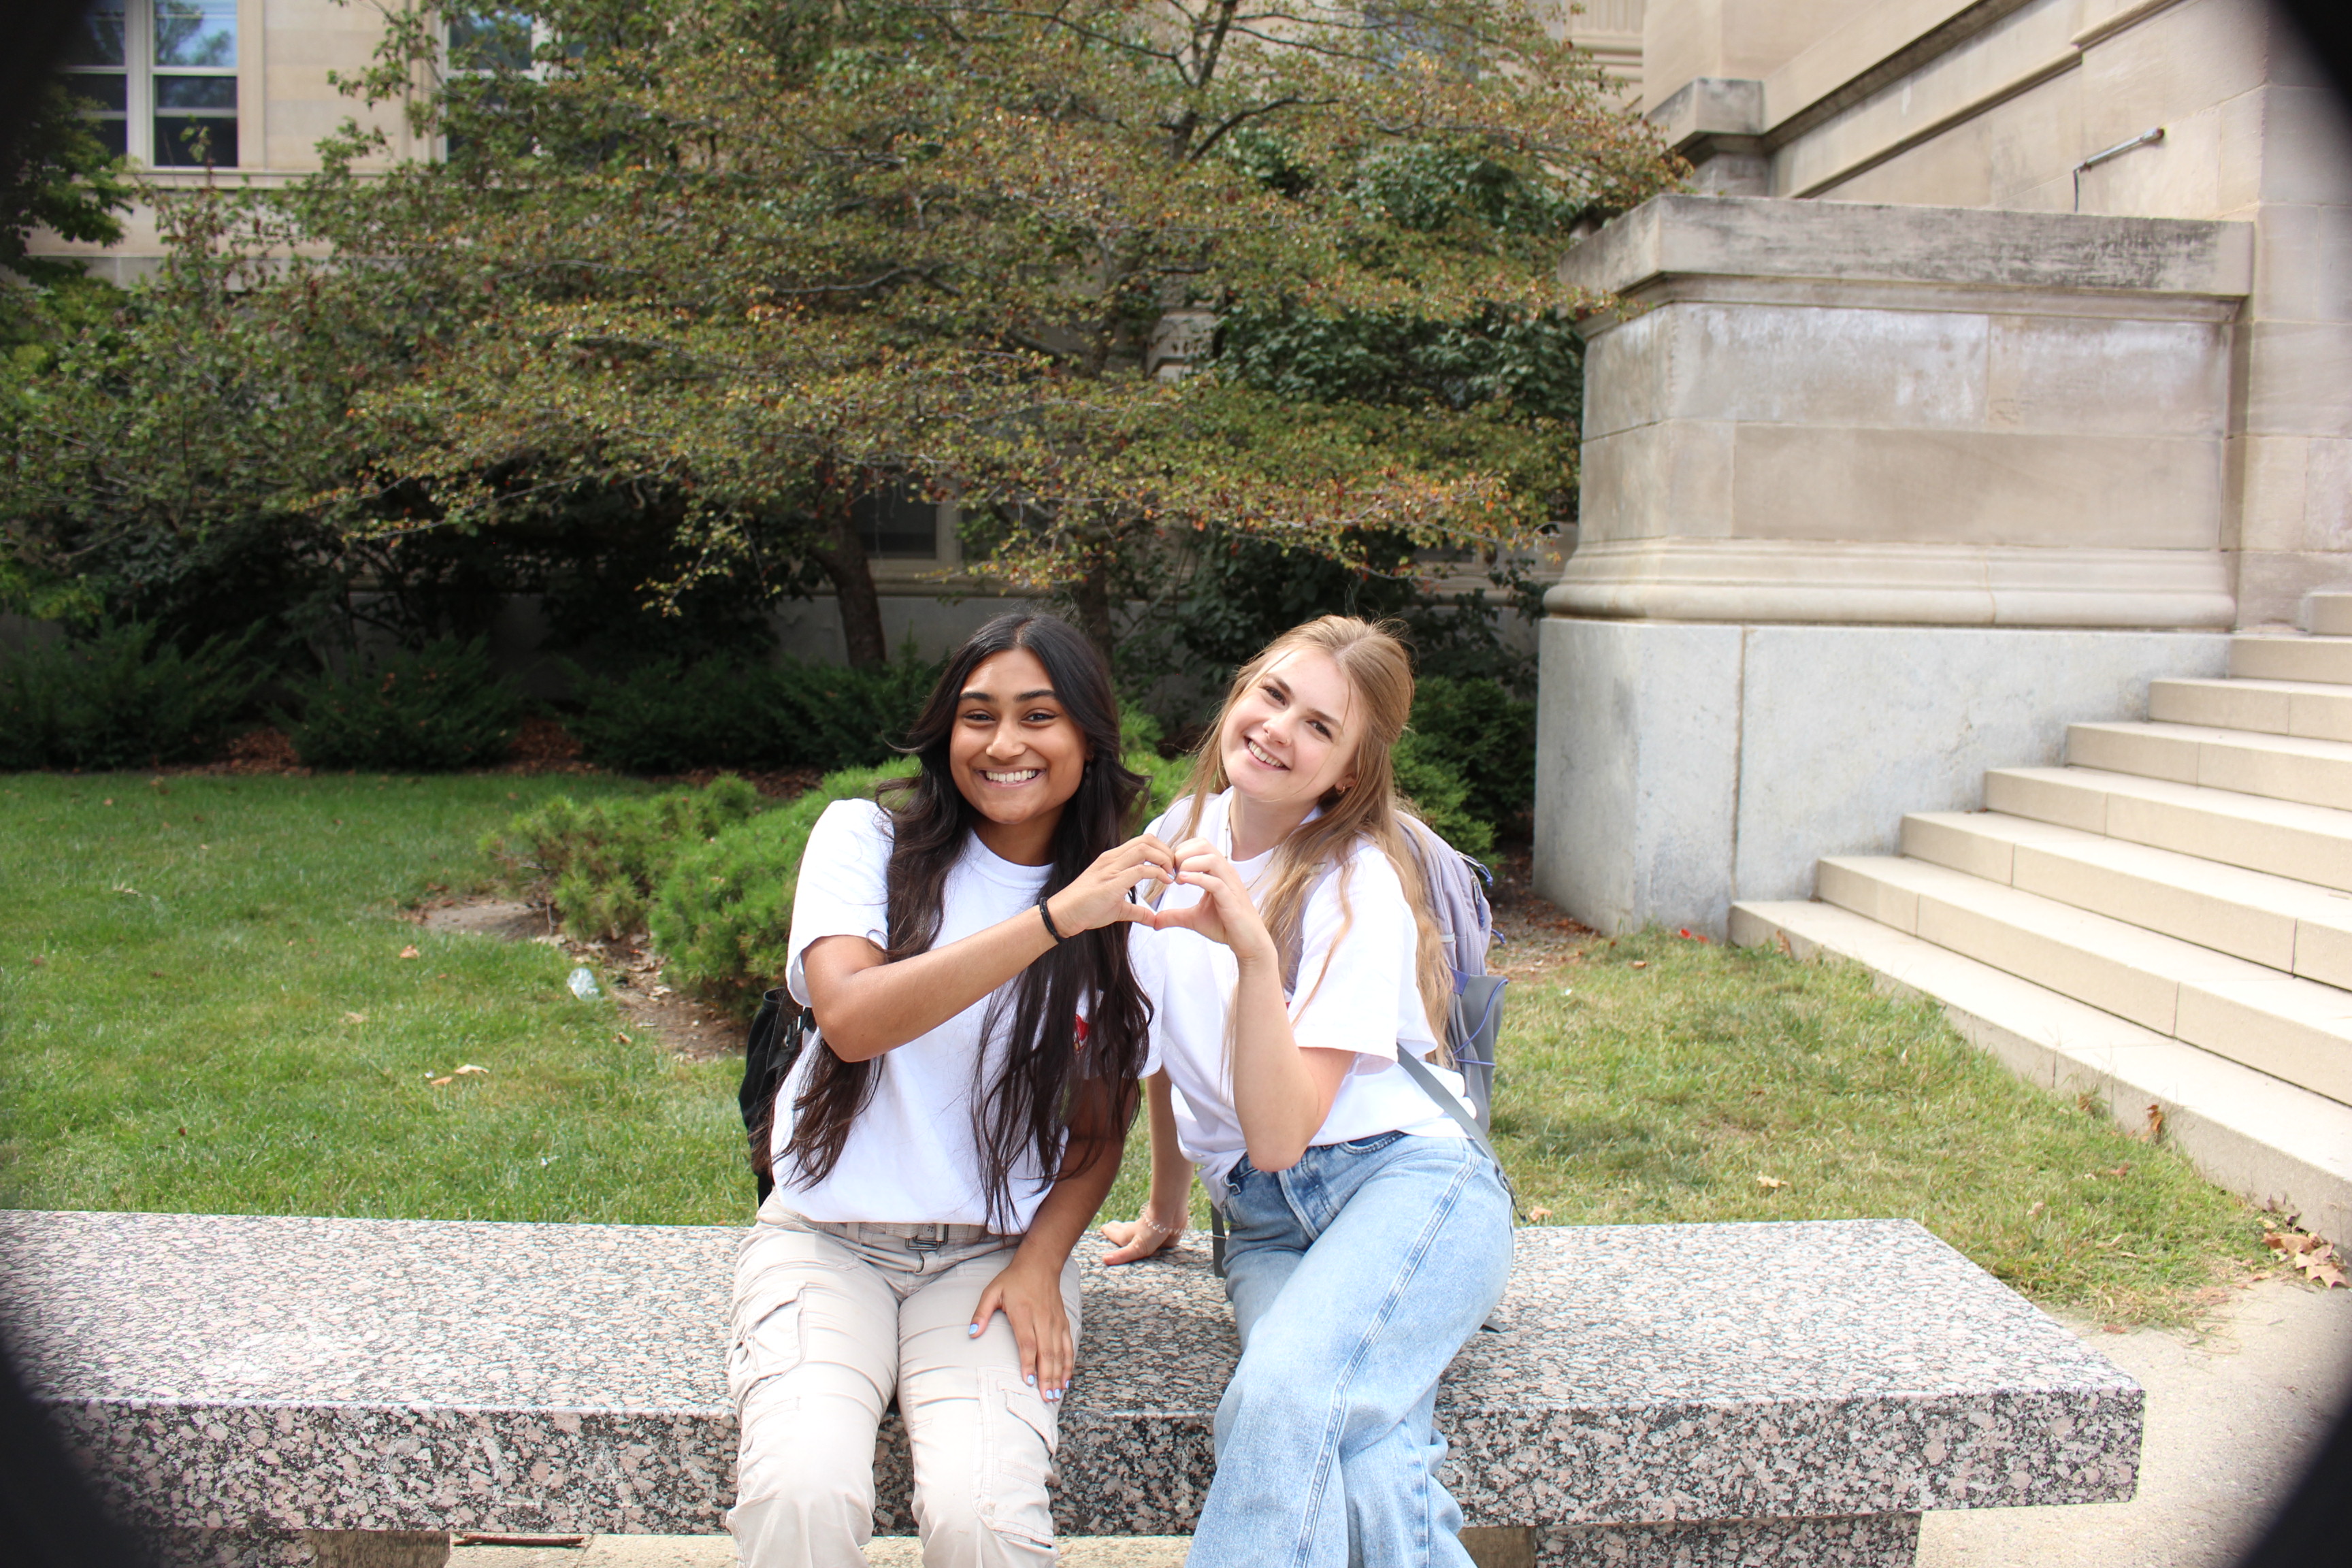 Two students sitting on a bench, smiling and making a heart with their hands.